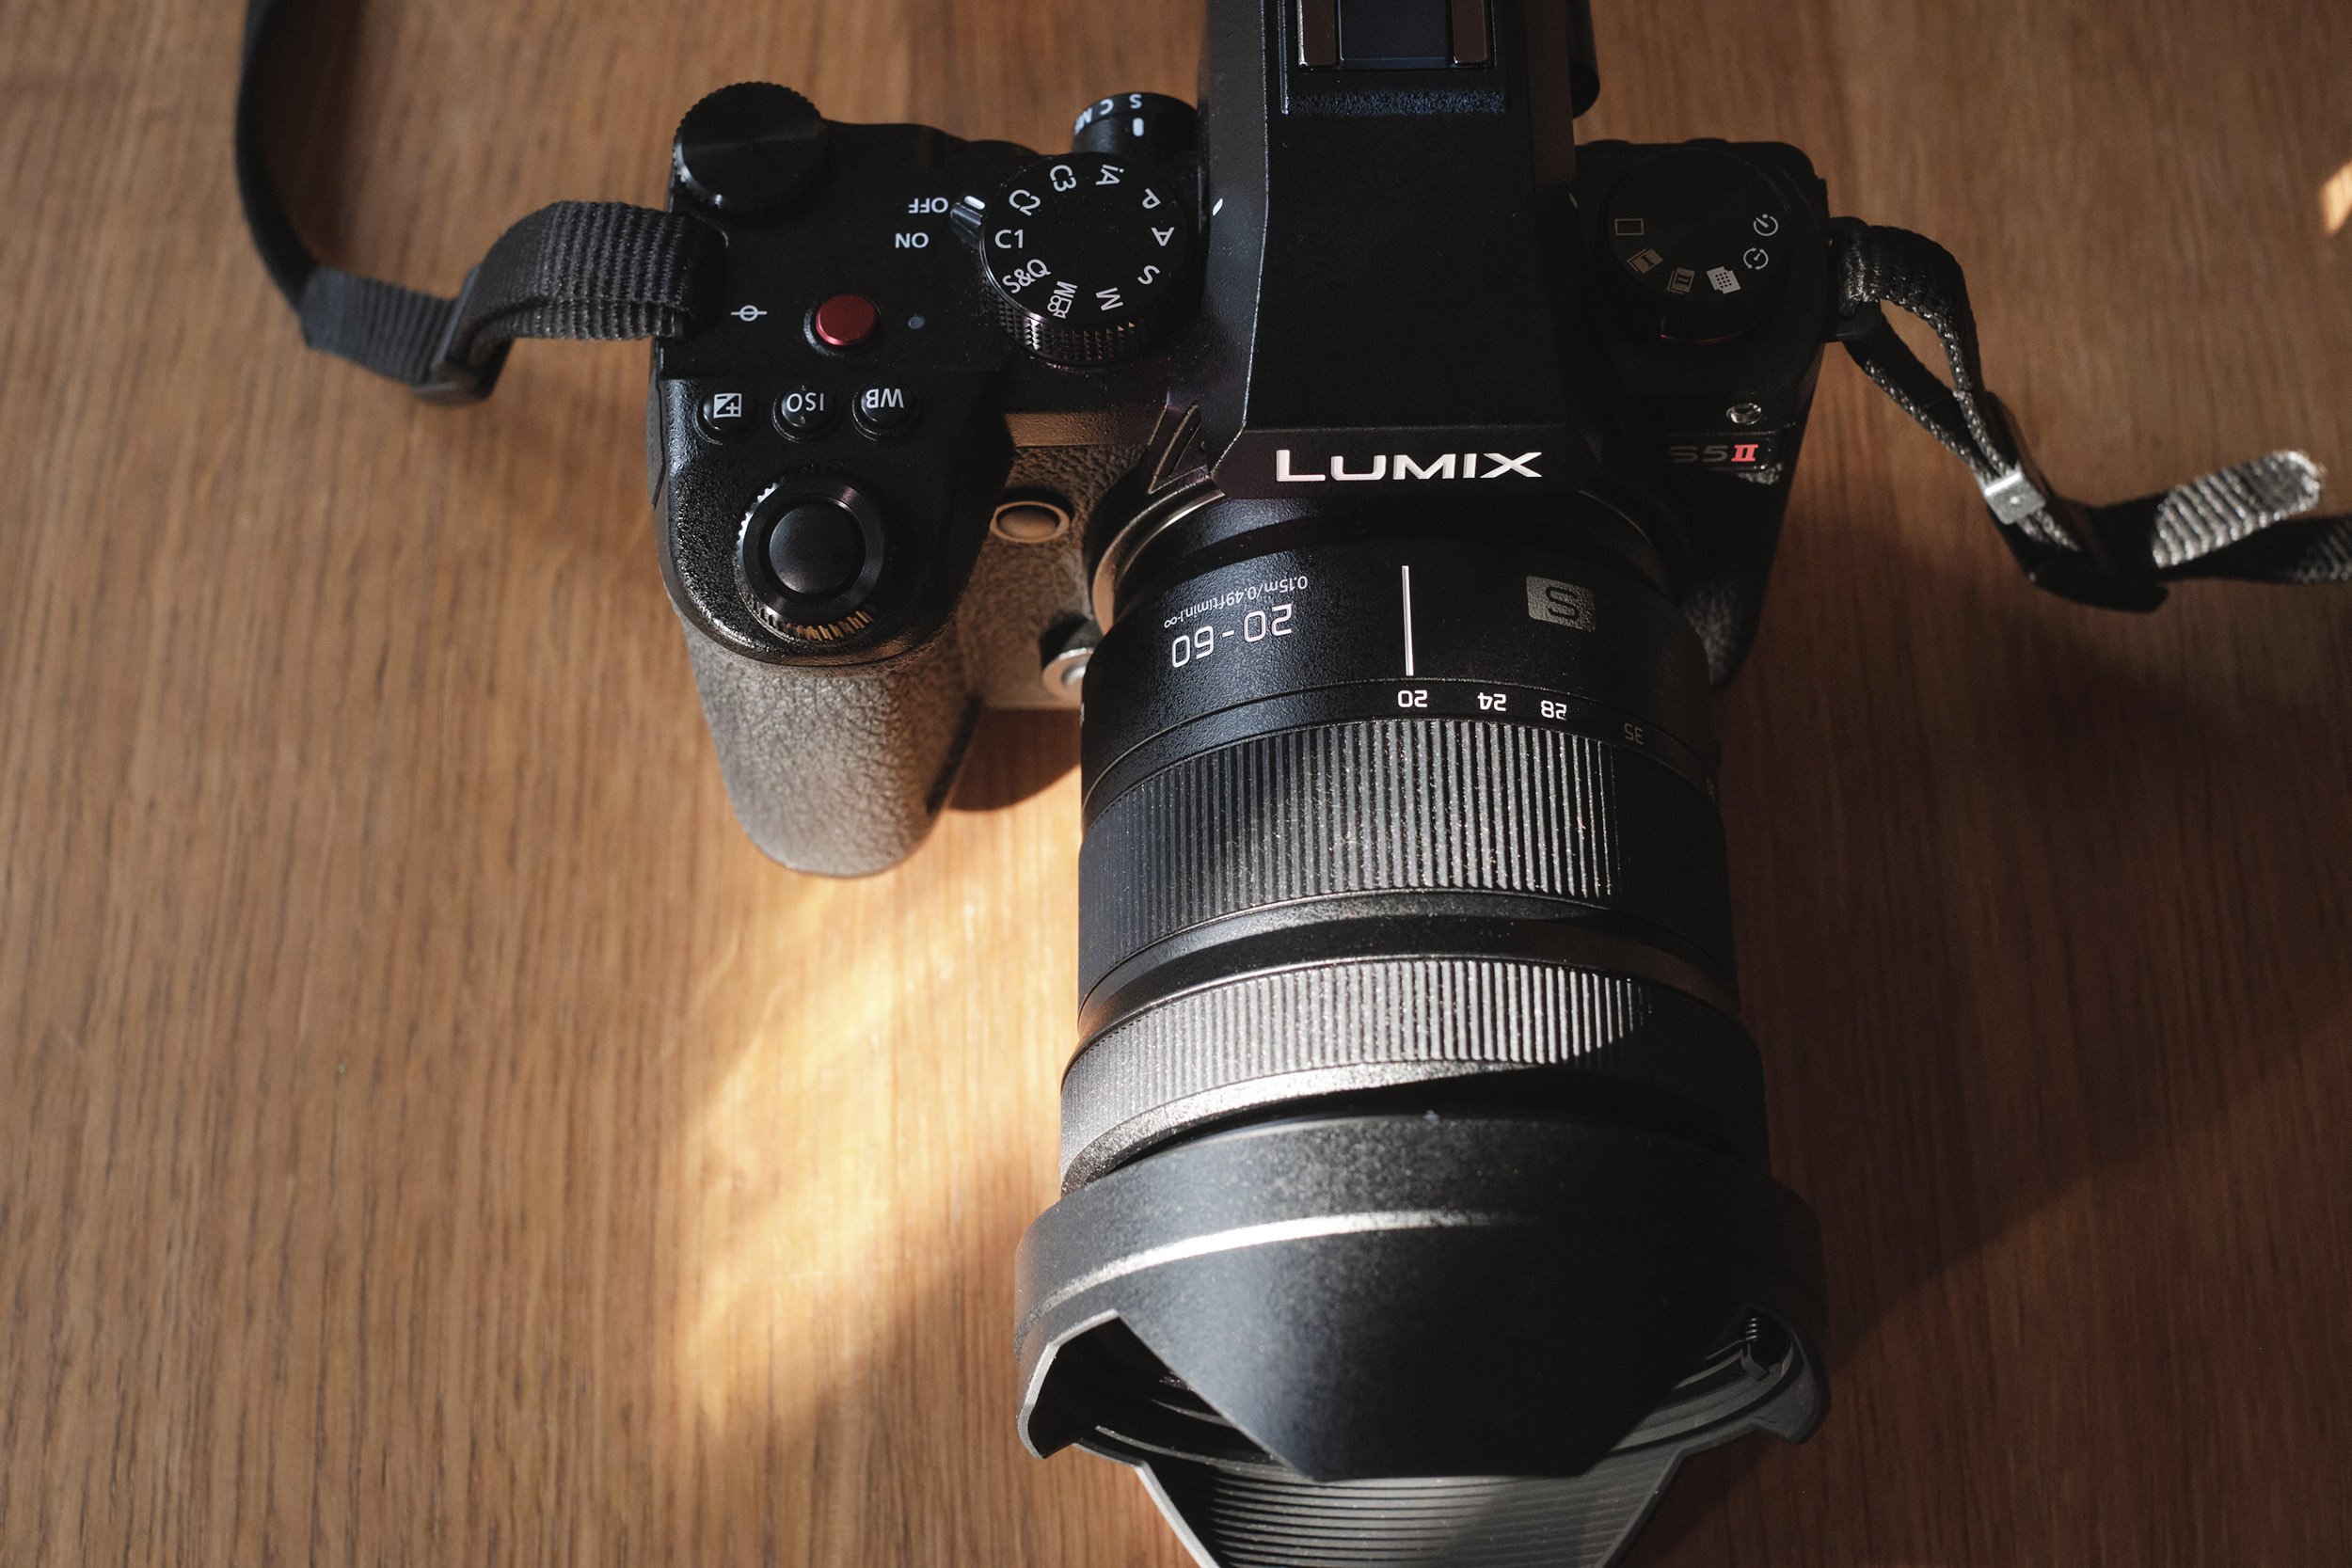 Panasonic Lumix S5 II Just Edged Out Sony & Canon - Hands On Review! 